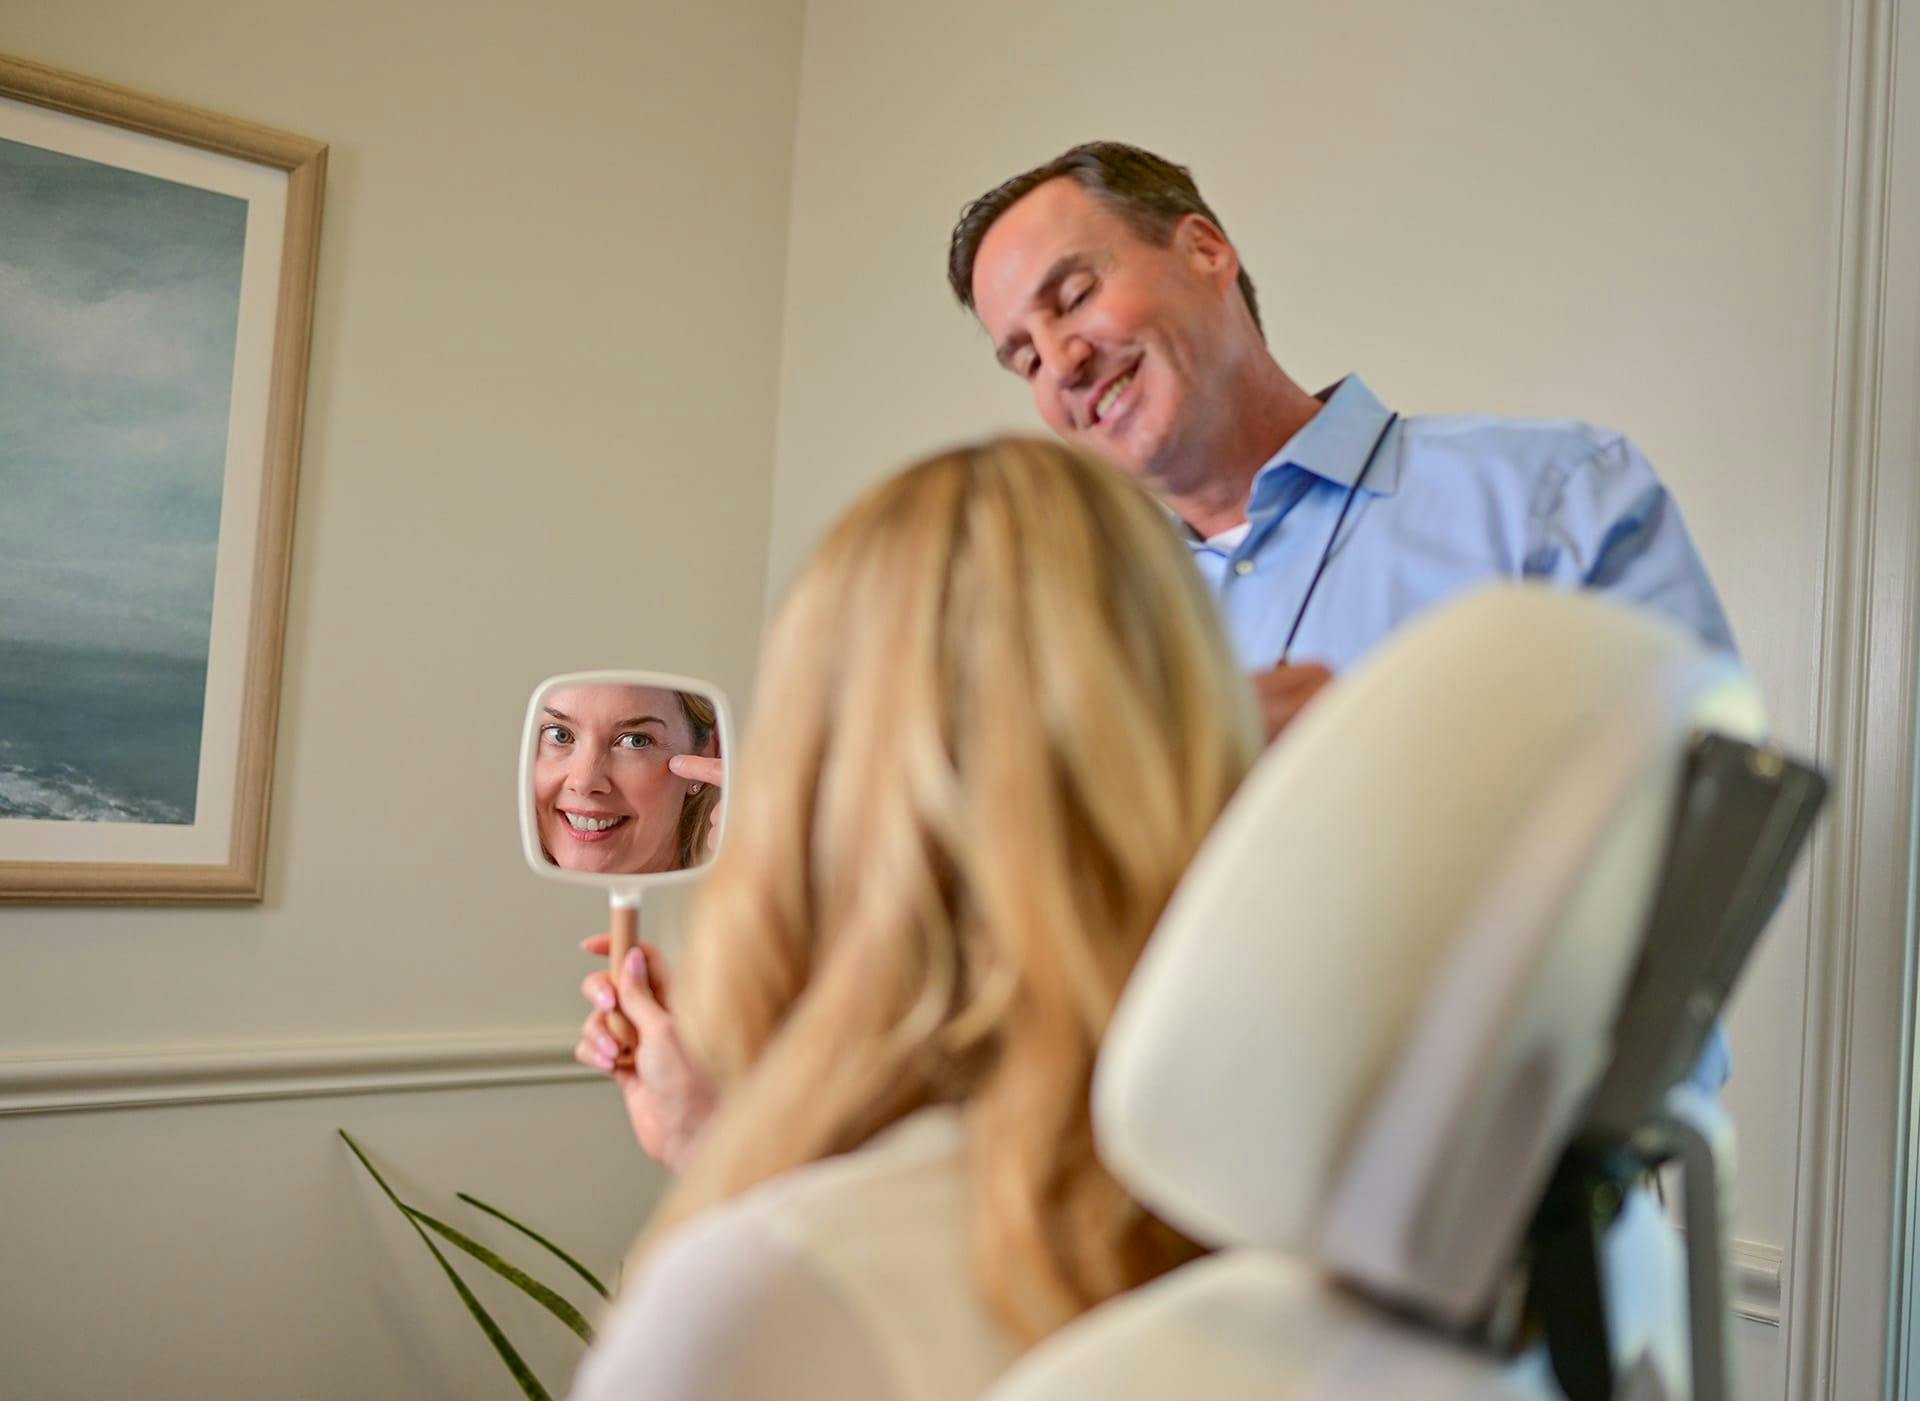 doctor showing patient her facial results on a handheld mirror